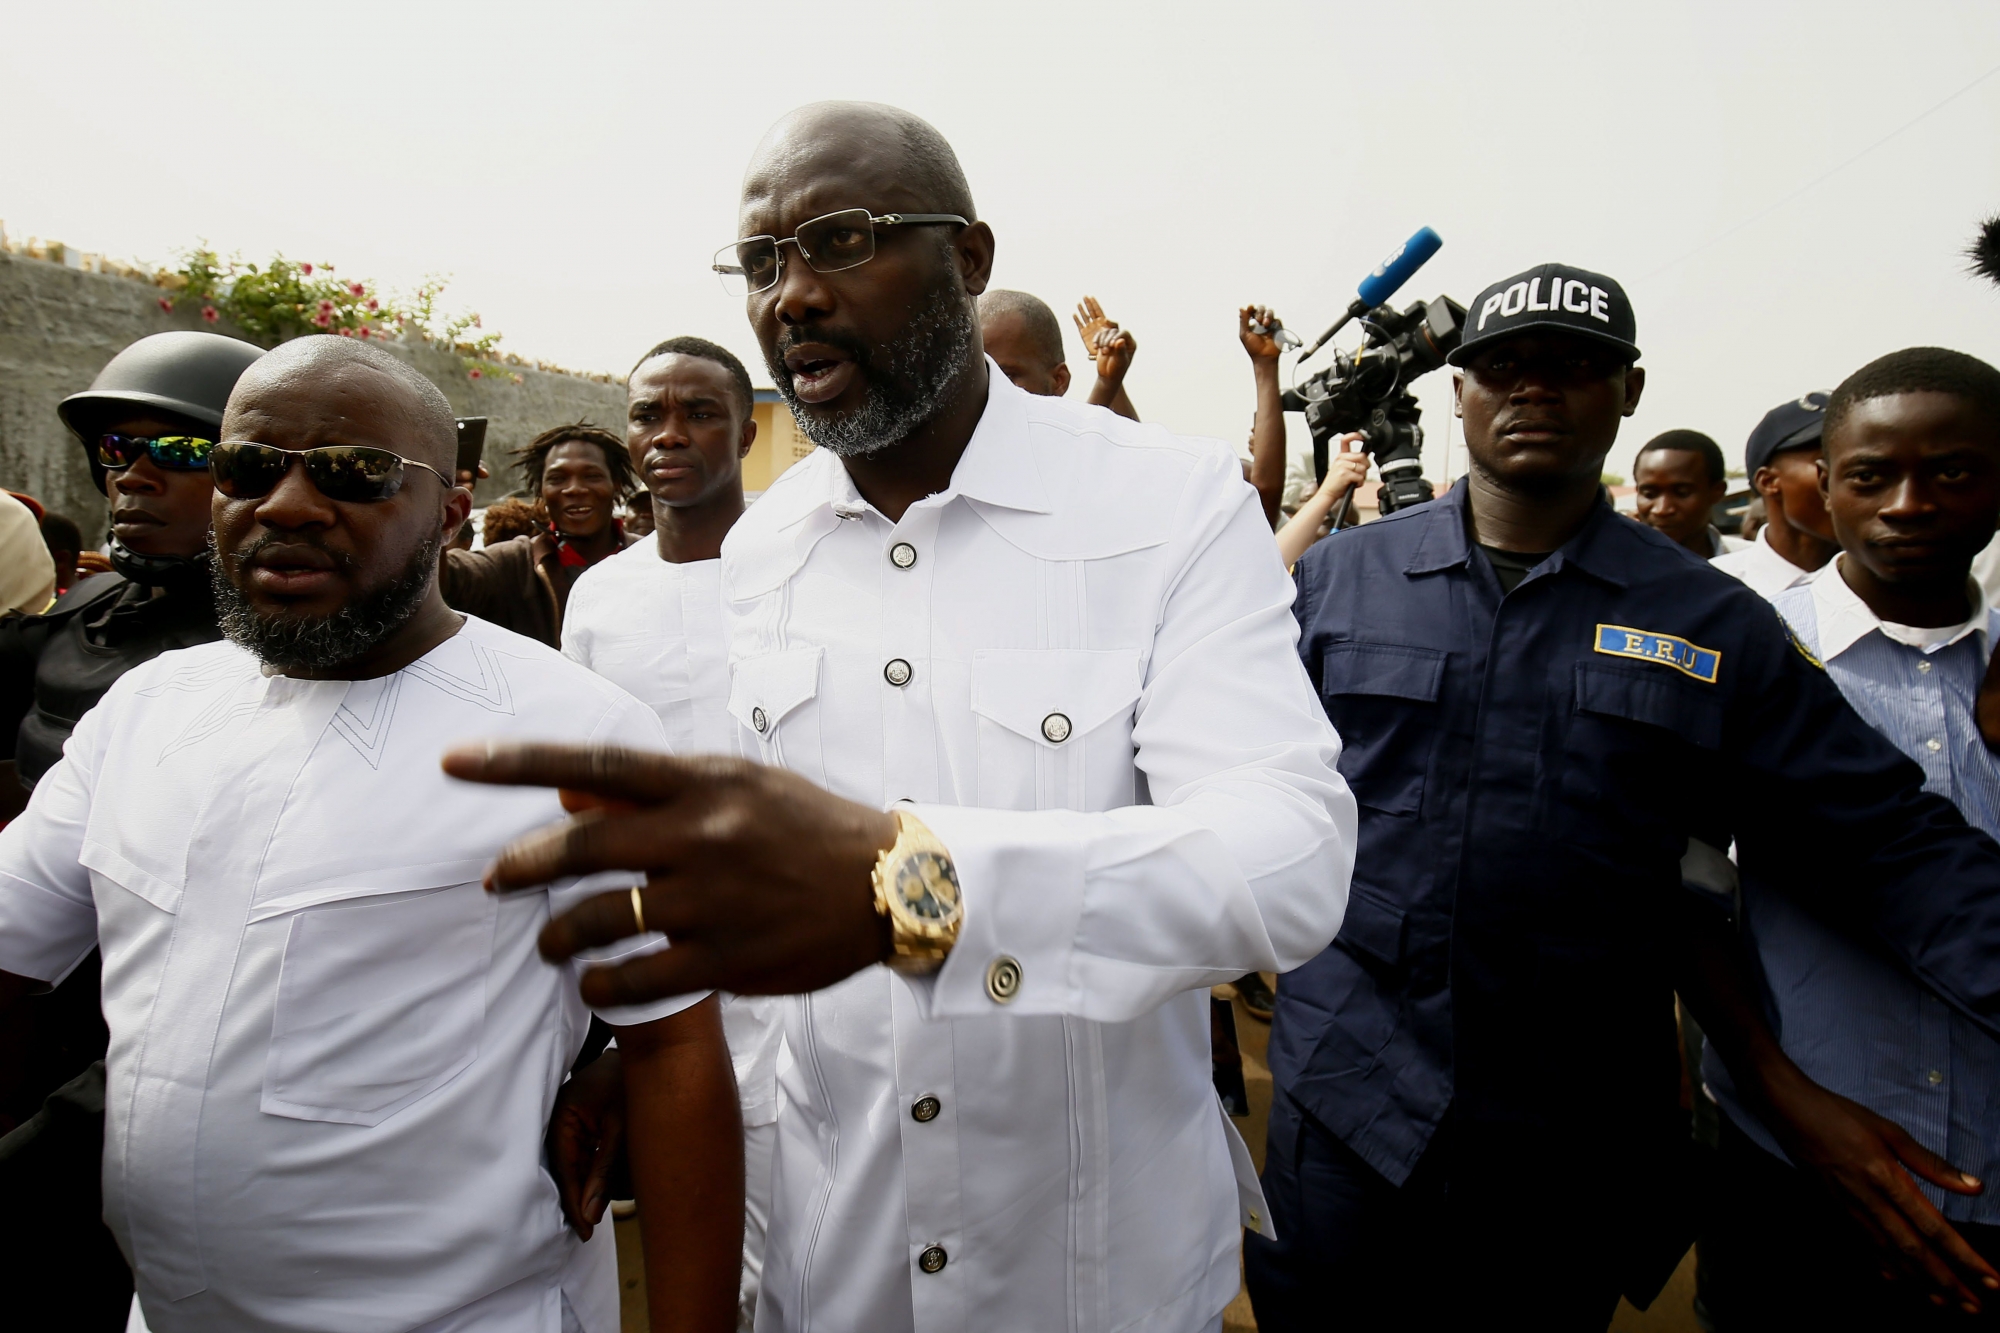 epa06405956 Liberian presidential candidate for the Coalition for Democratic Change (CDC), George Weah (C) leaves a polling station after casting his ballot in presidential elections run-off in Monrovia, Liberia, 26 December 2017. Some 2.1 million registered Liberian voters are eligible to vote in the presidential run-off between George Weah, of the Coalition for Democratic Change (CDC), and Joseph Nyuma Boakai of the governing Unity Party (UP).  EPA/AHMED JALLANZO LIBERIA PRESIDENTIAL EELCTIONS RUN OFF